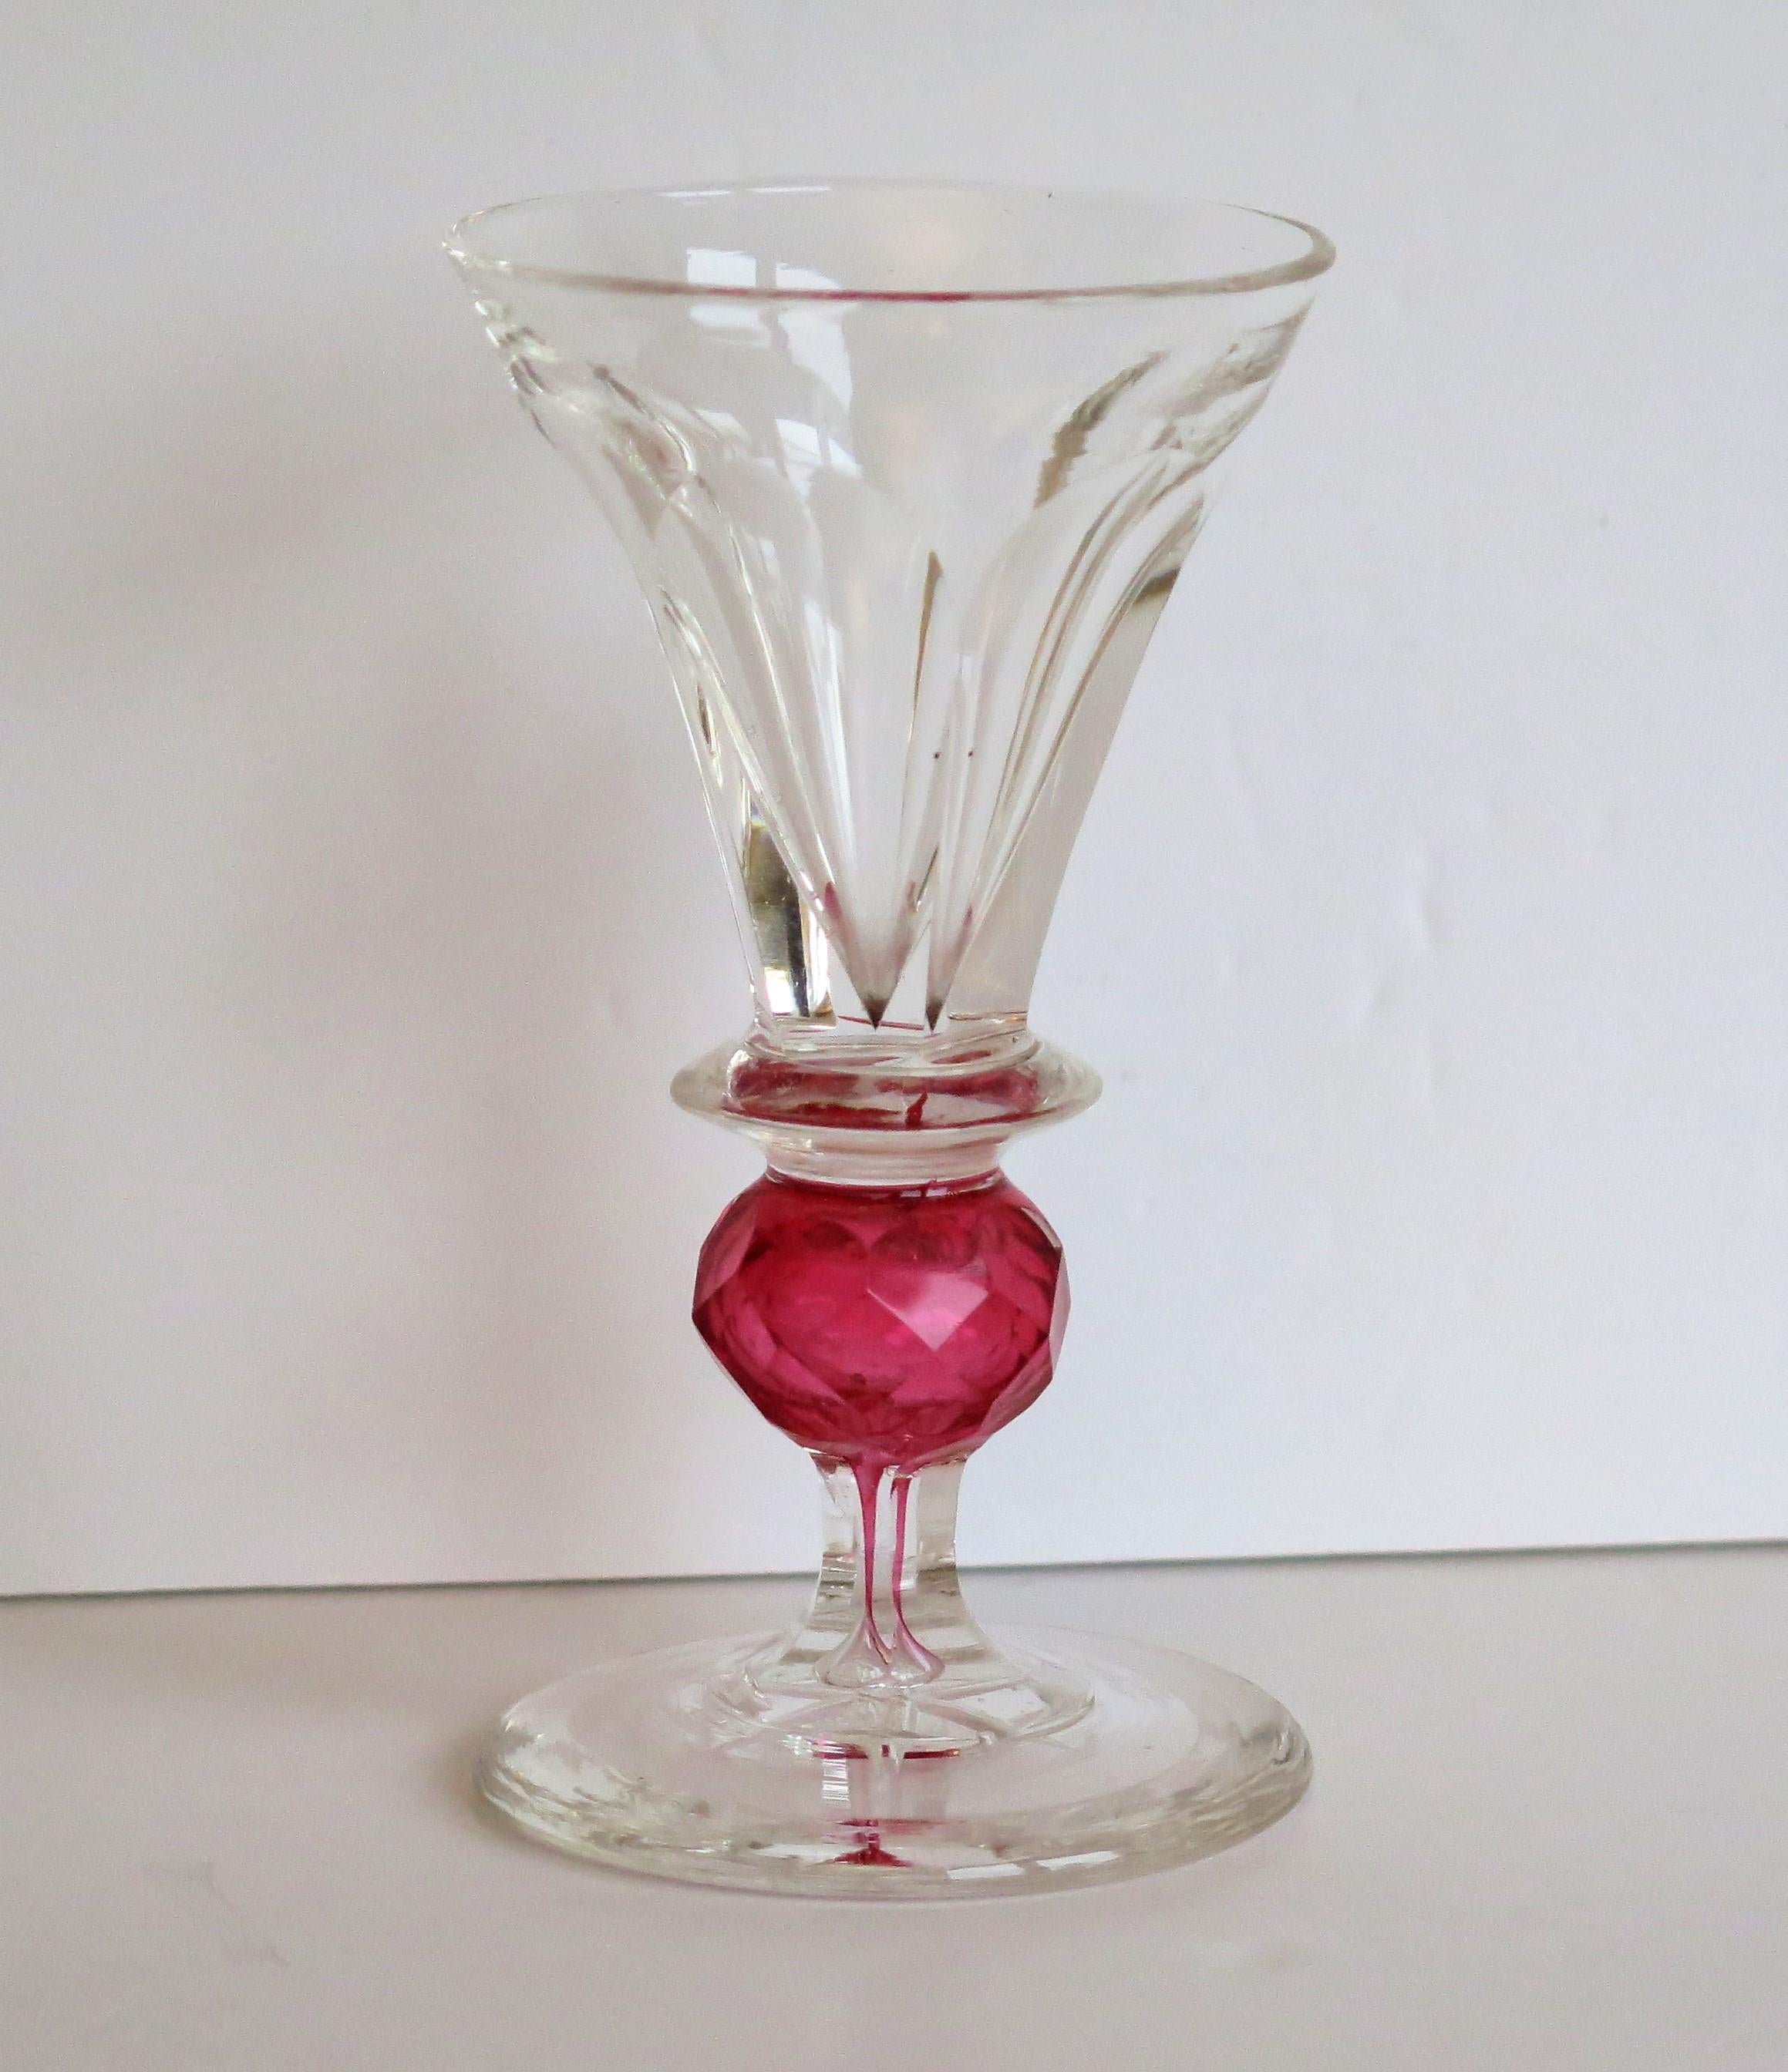 Rare Hand Blown Drinking Glass with Cranberry Colored Knop, English Mid-19th C For Sale 1